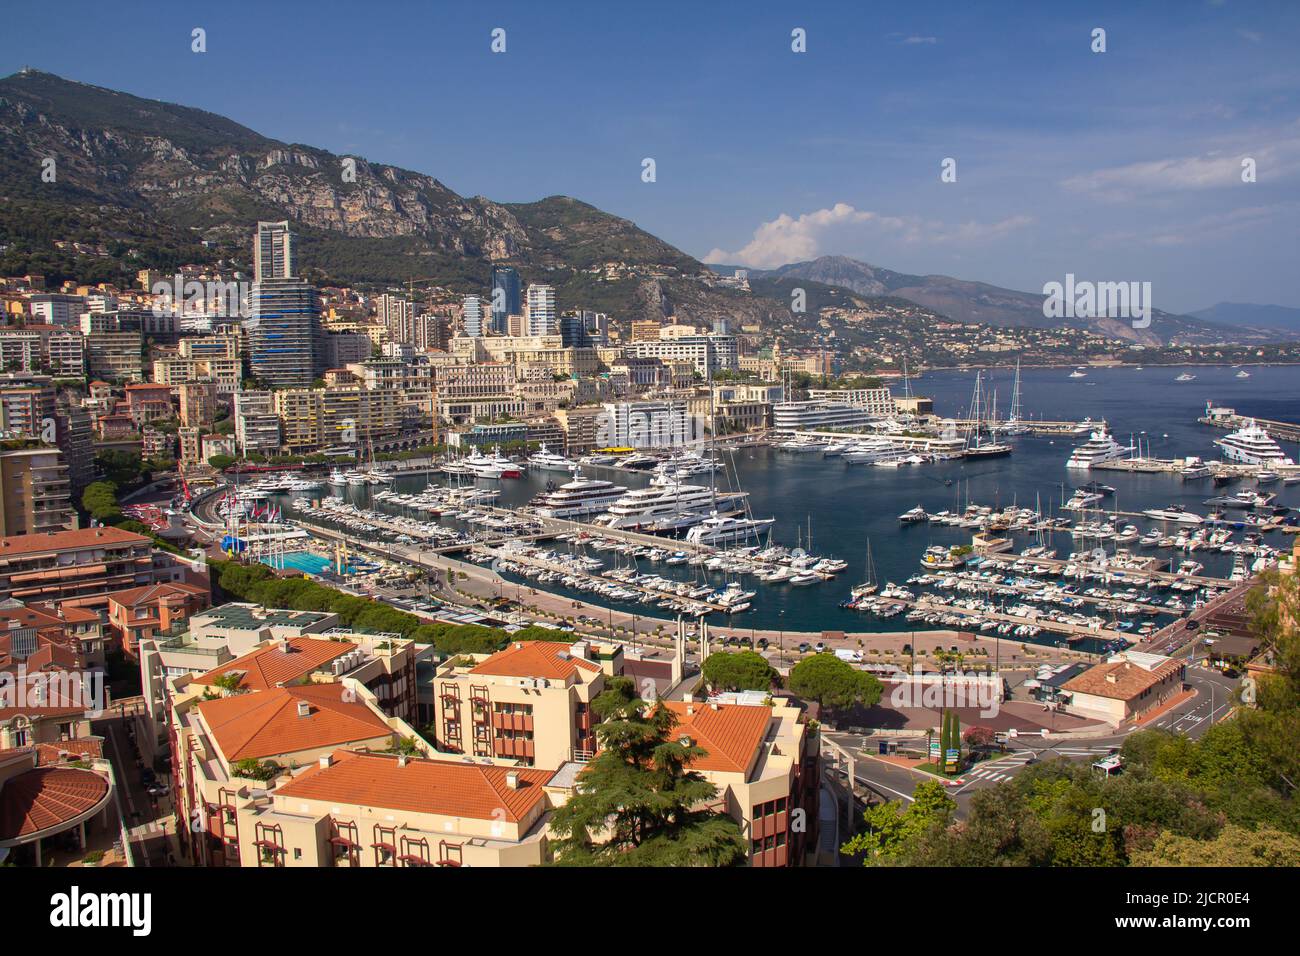 Panoramic aerial view of Monaco and Port Hercule, sweeping views of the city, mountains and harbor, luxury yachts and apartments in La Condamine Stock Photo